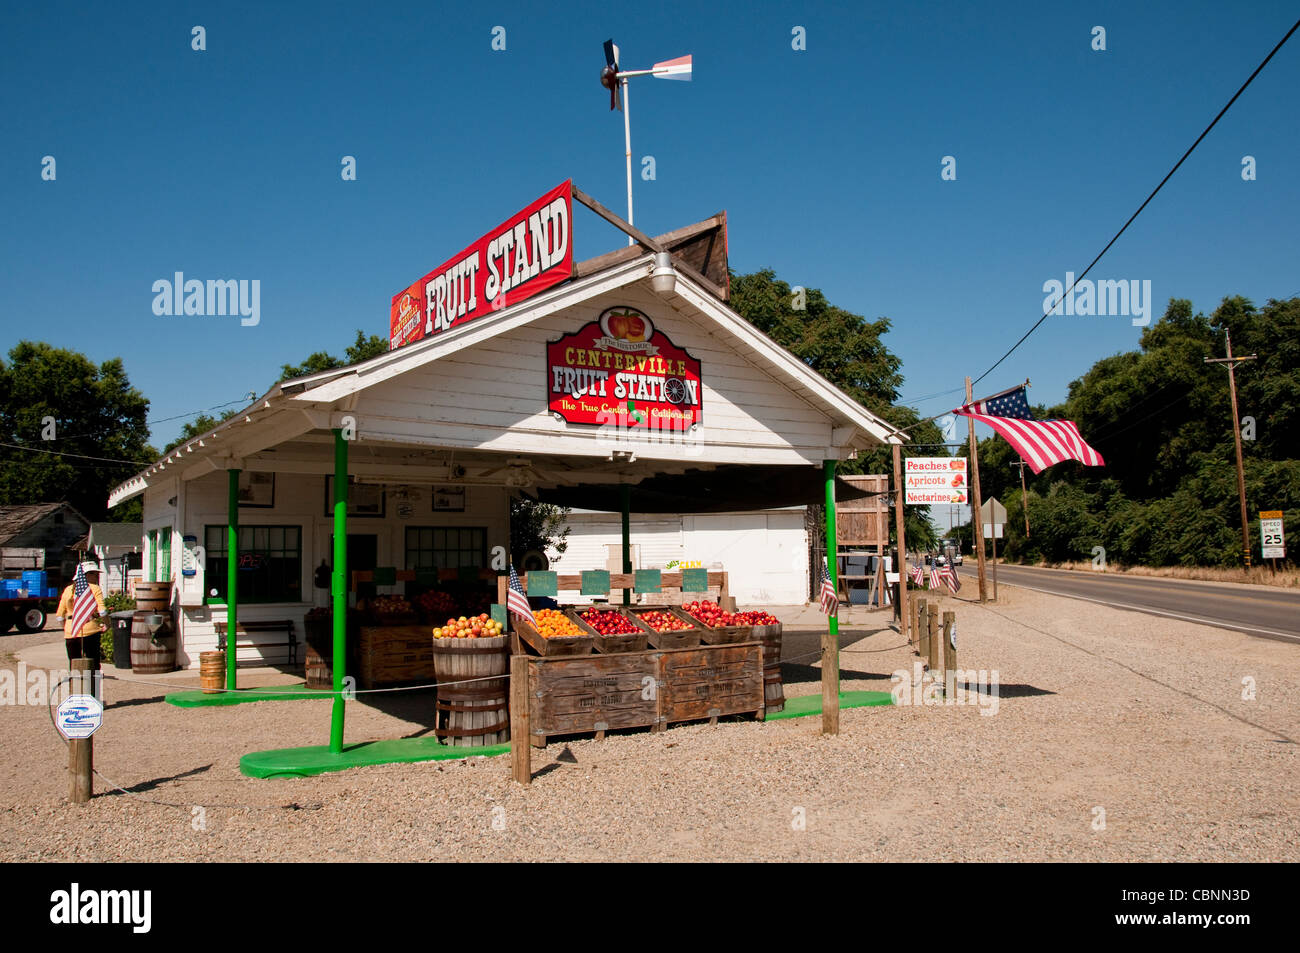 Roadside fruit stand near Fresno in Centreville California on road to Stock Photo: 41659505 - Alamy